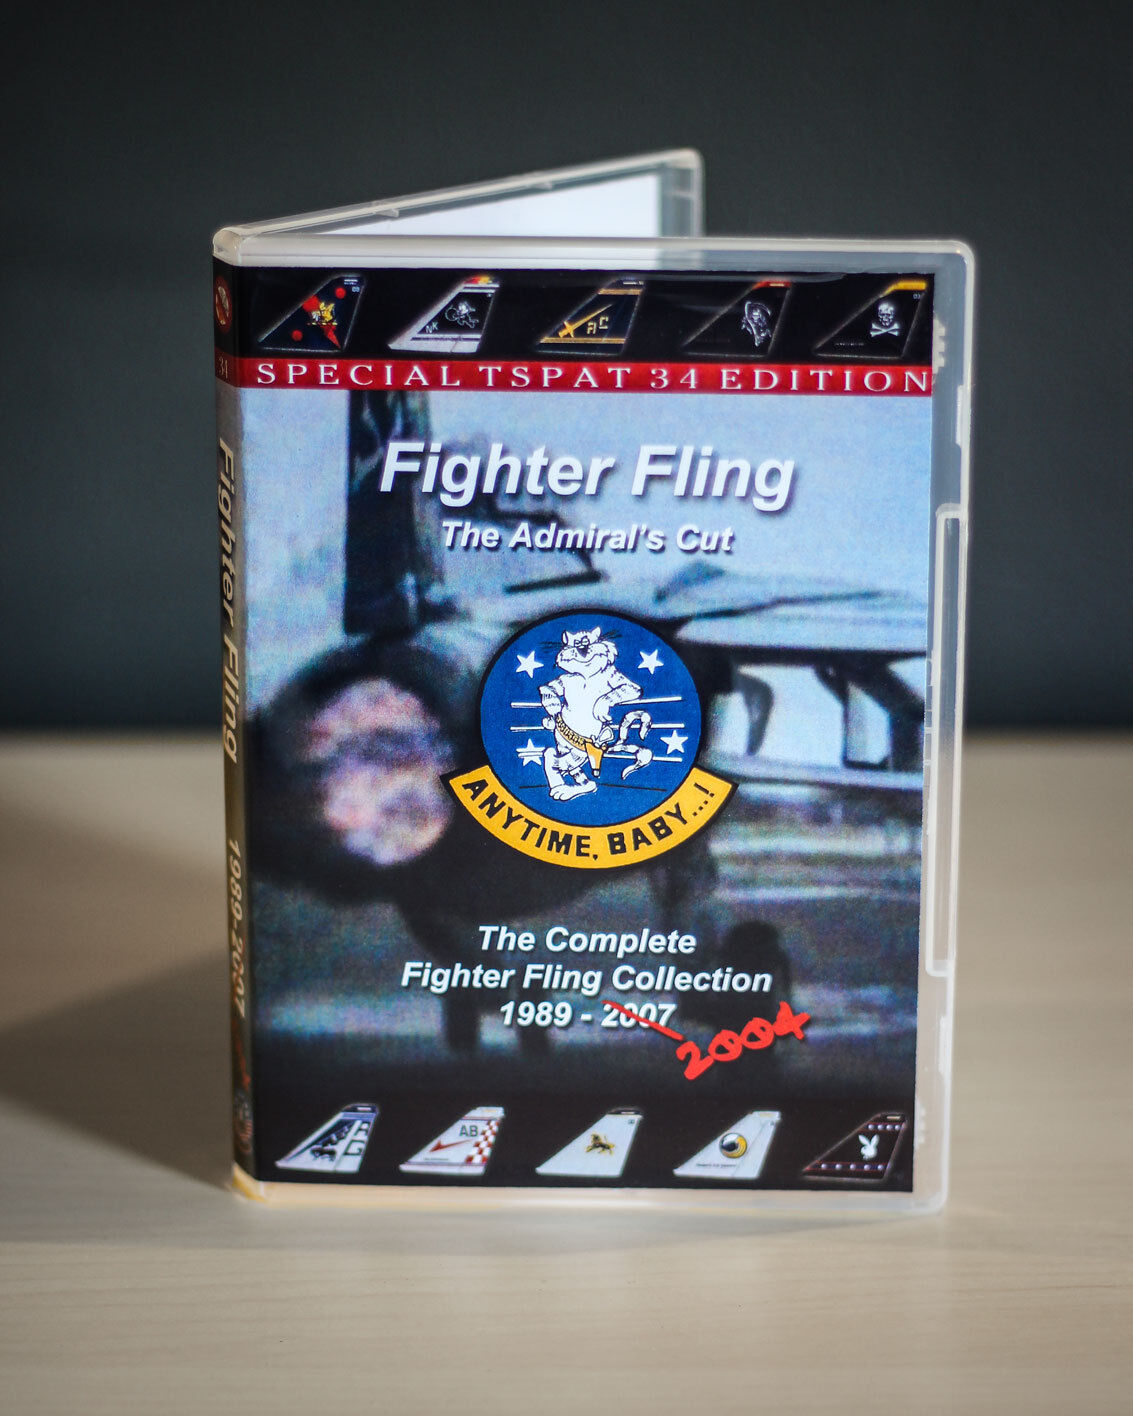 FIGHTER FLING The Complete Collection 1989-2004 F-14 Tomcat 2 Disc DVD Video Set